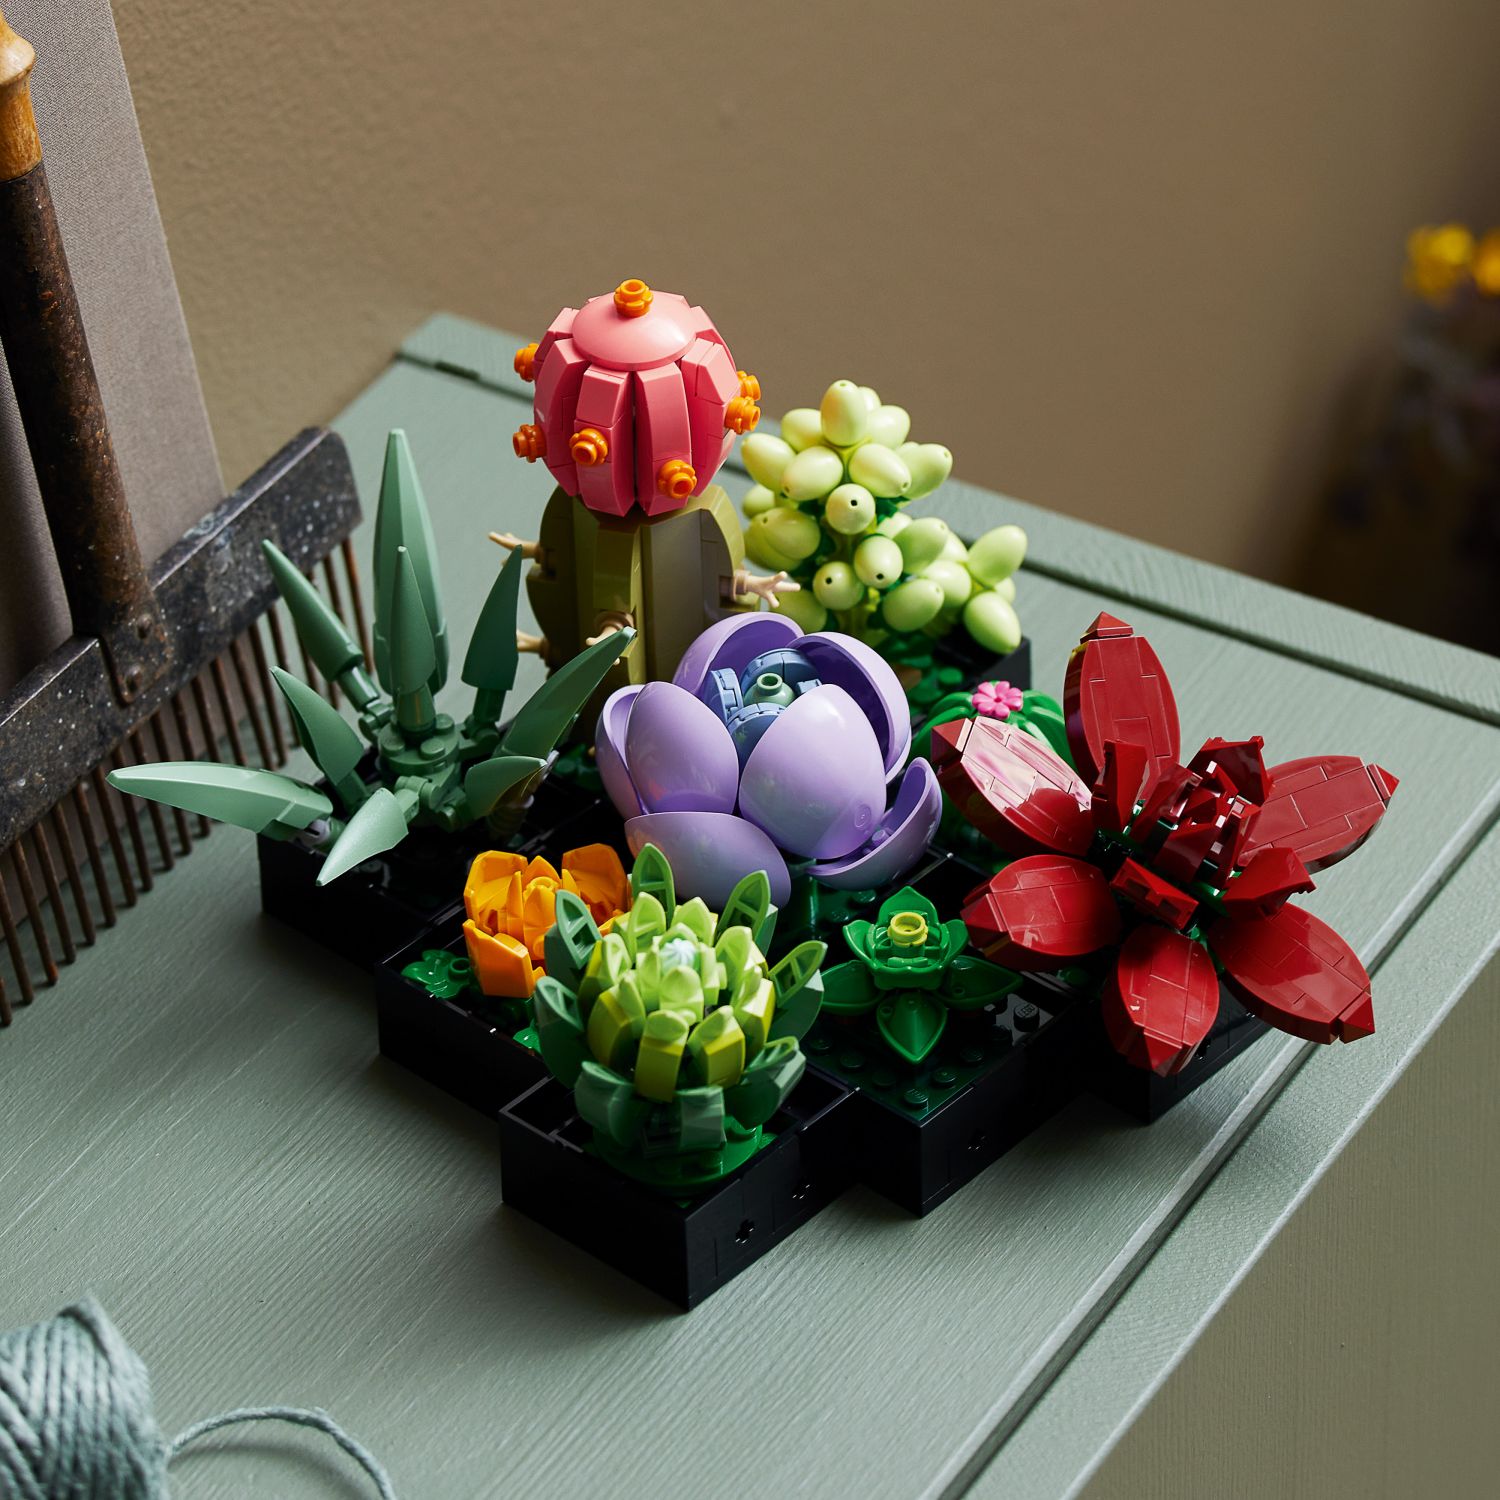 LEGO Releases New Botanical 10311 Orchid & 10309 Succulents Collection